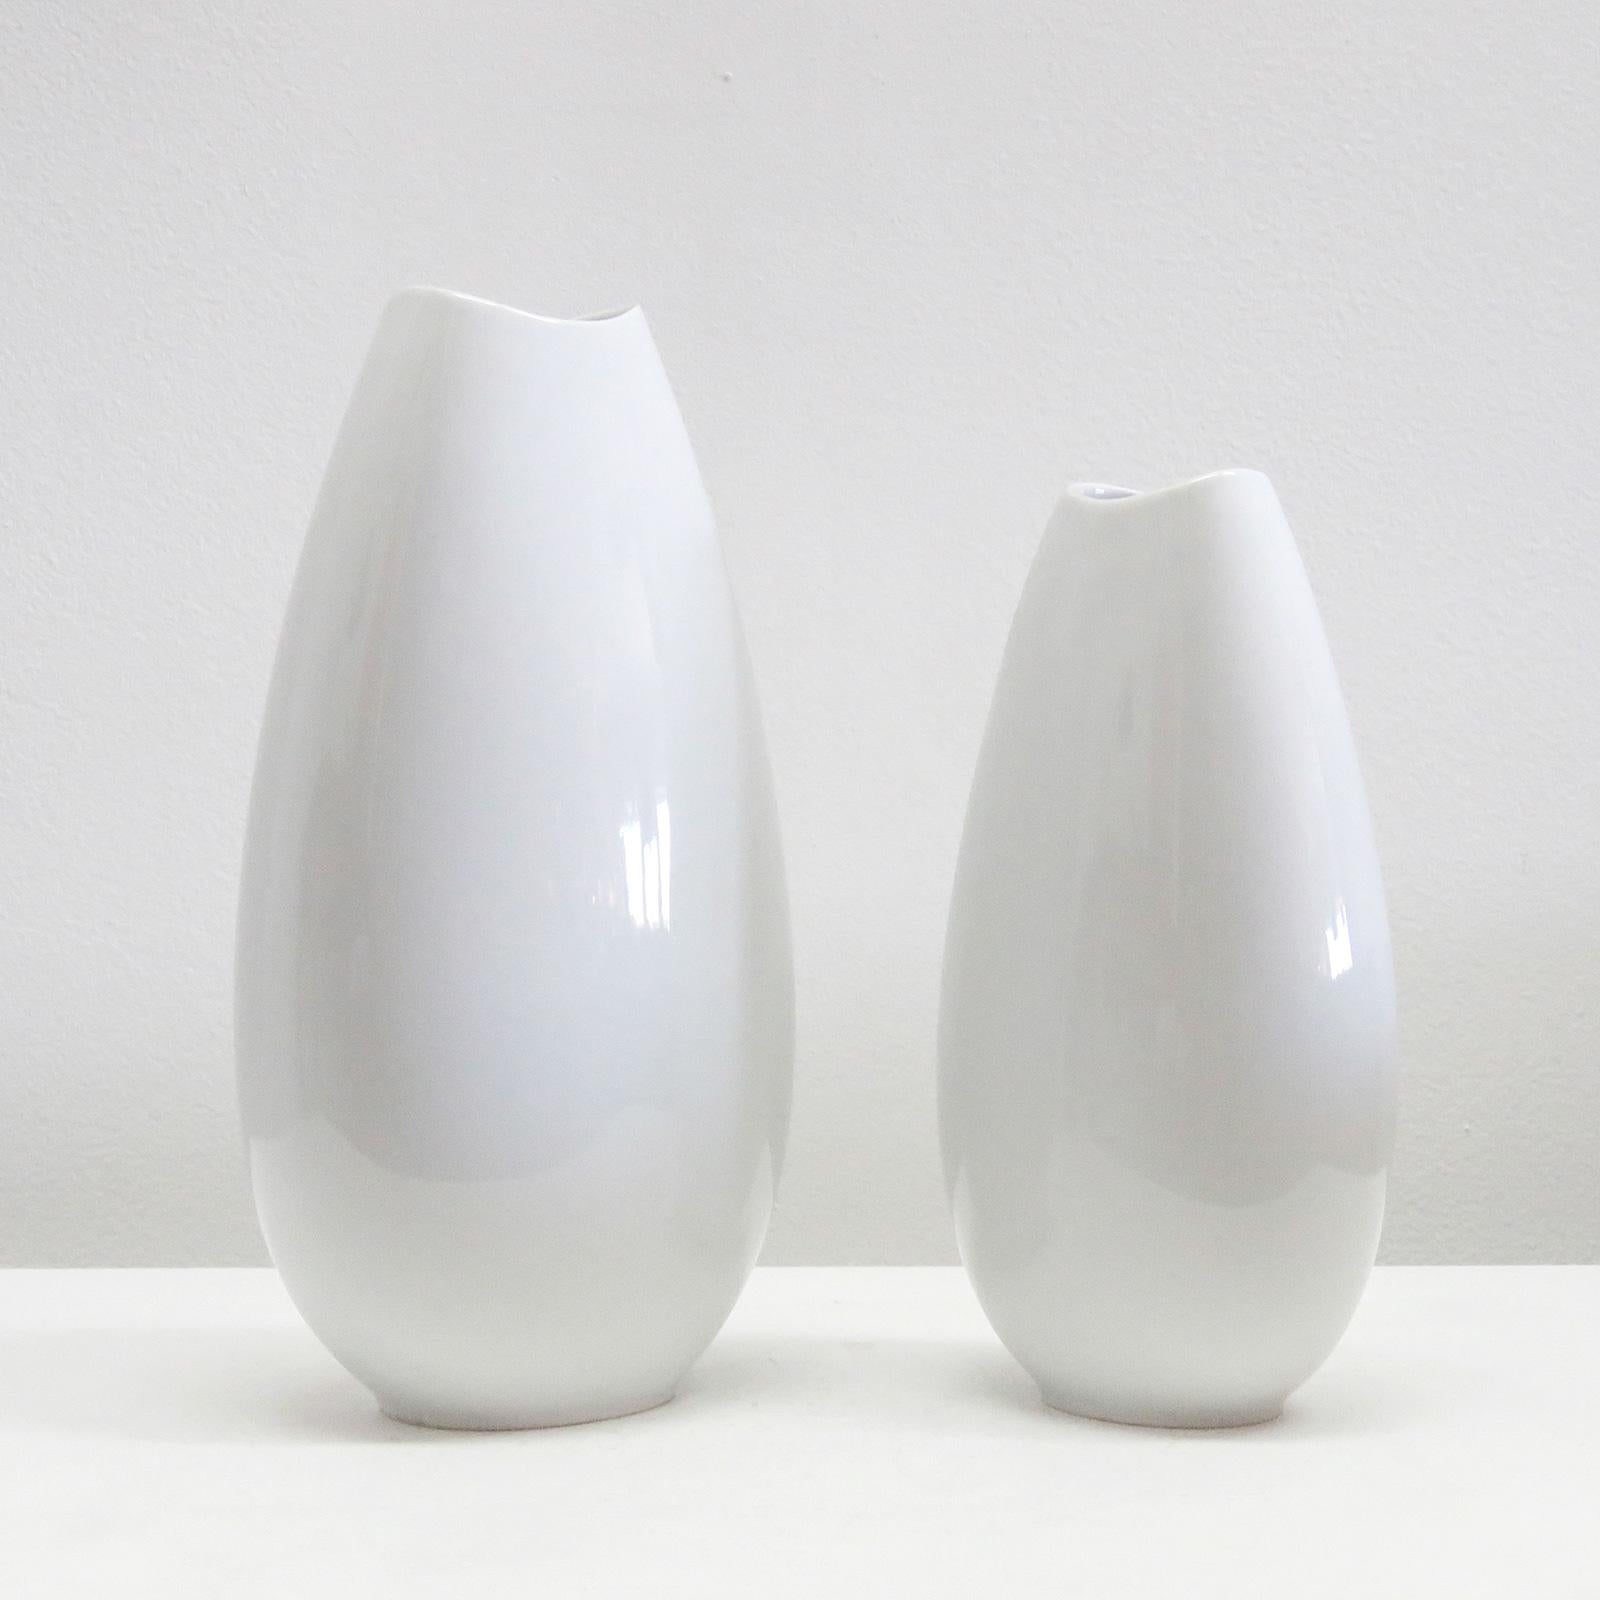 German Set of Raymond Loewy for Thomas Vases, 1970 For Sale